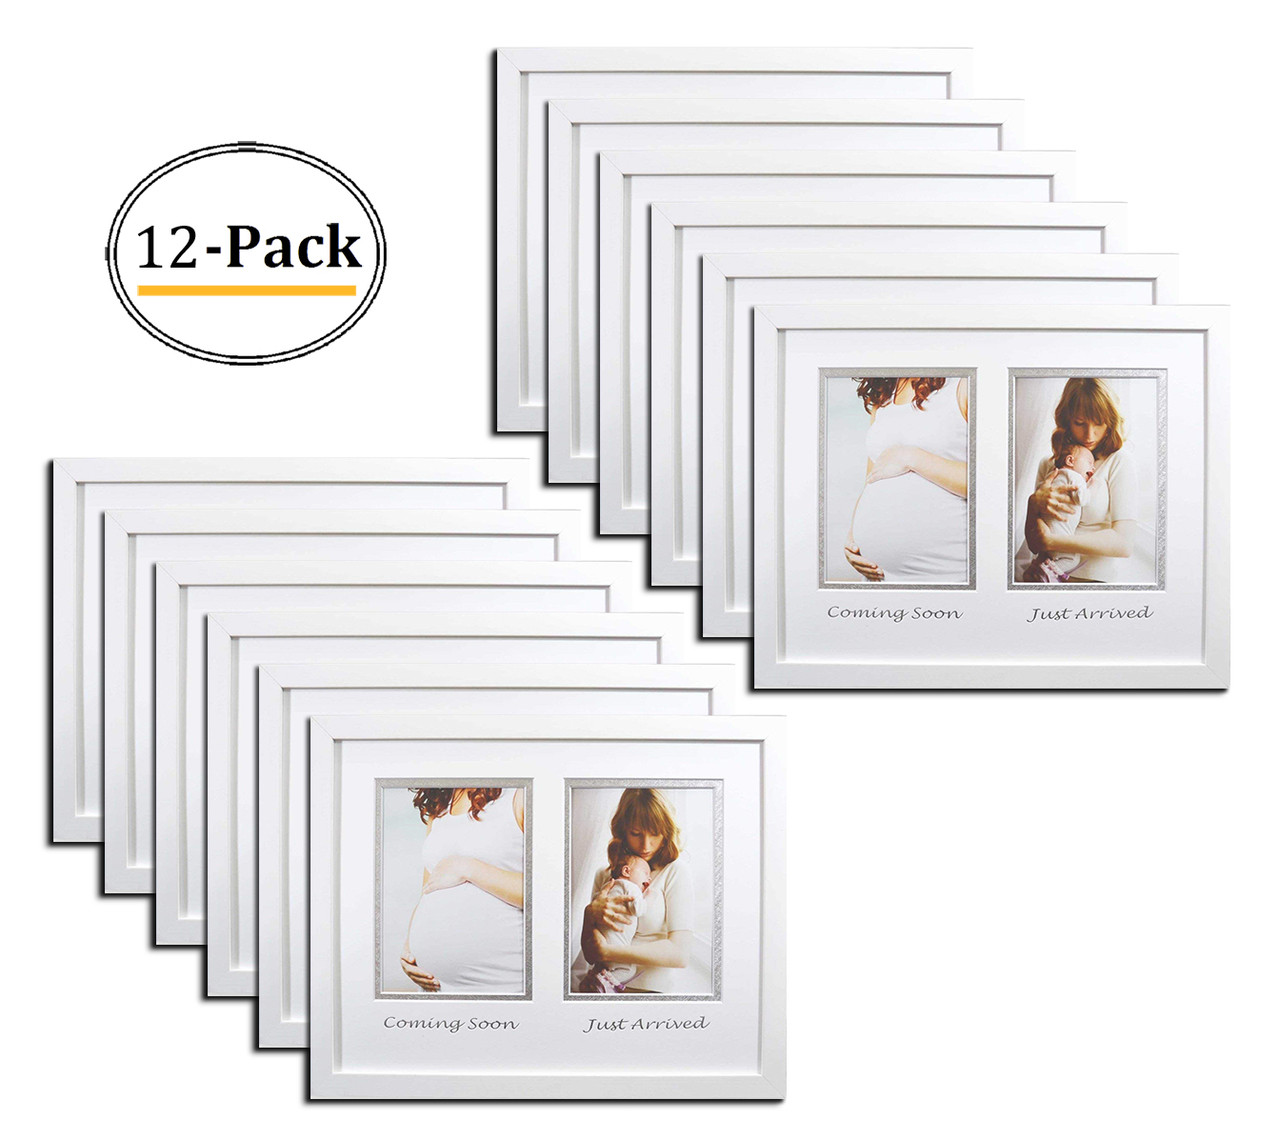  Mat Board Center, White Color Mats - Bevel Cut, Acid Free,  4-ply Thickness, White Core - for Pictures, Photos, Framing, Pack of 2,  18x24 for 13x19